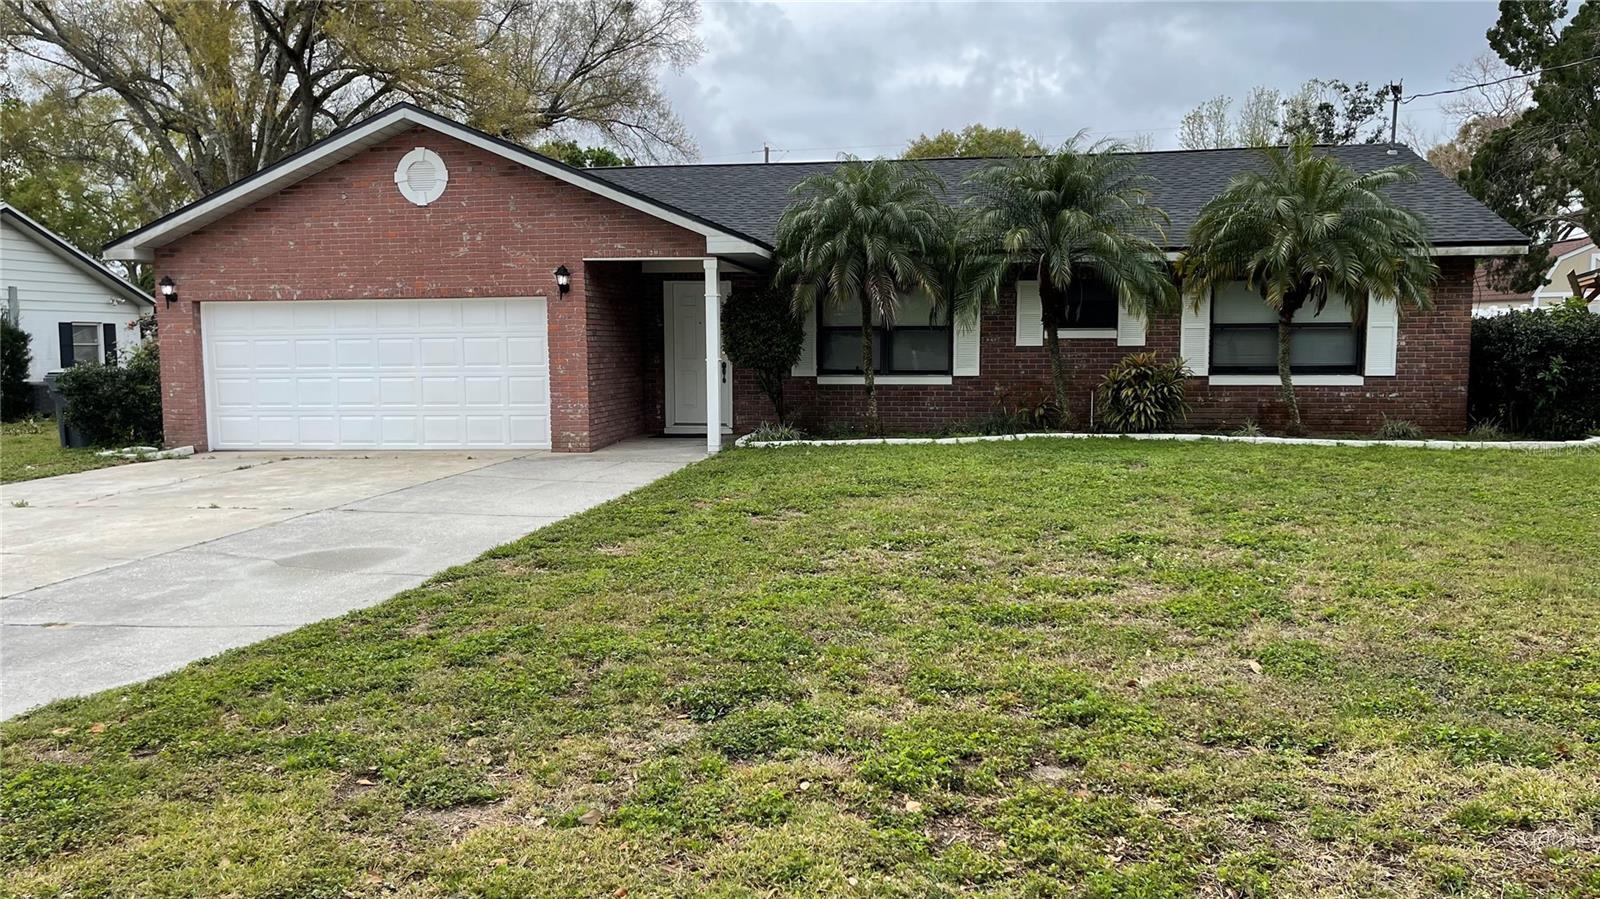 Photo one of 10 S Lake Fox Rd Winter Haven FL 33884 | MLS S5094805